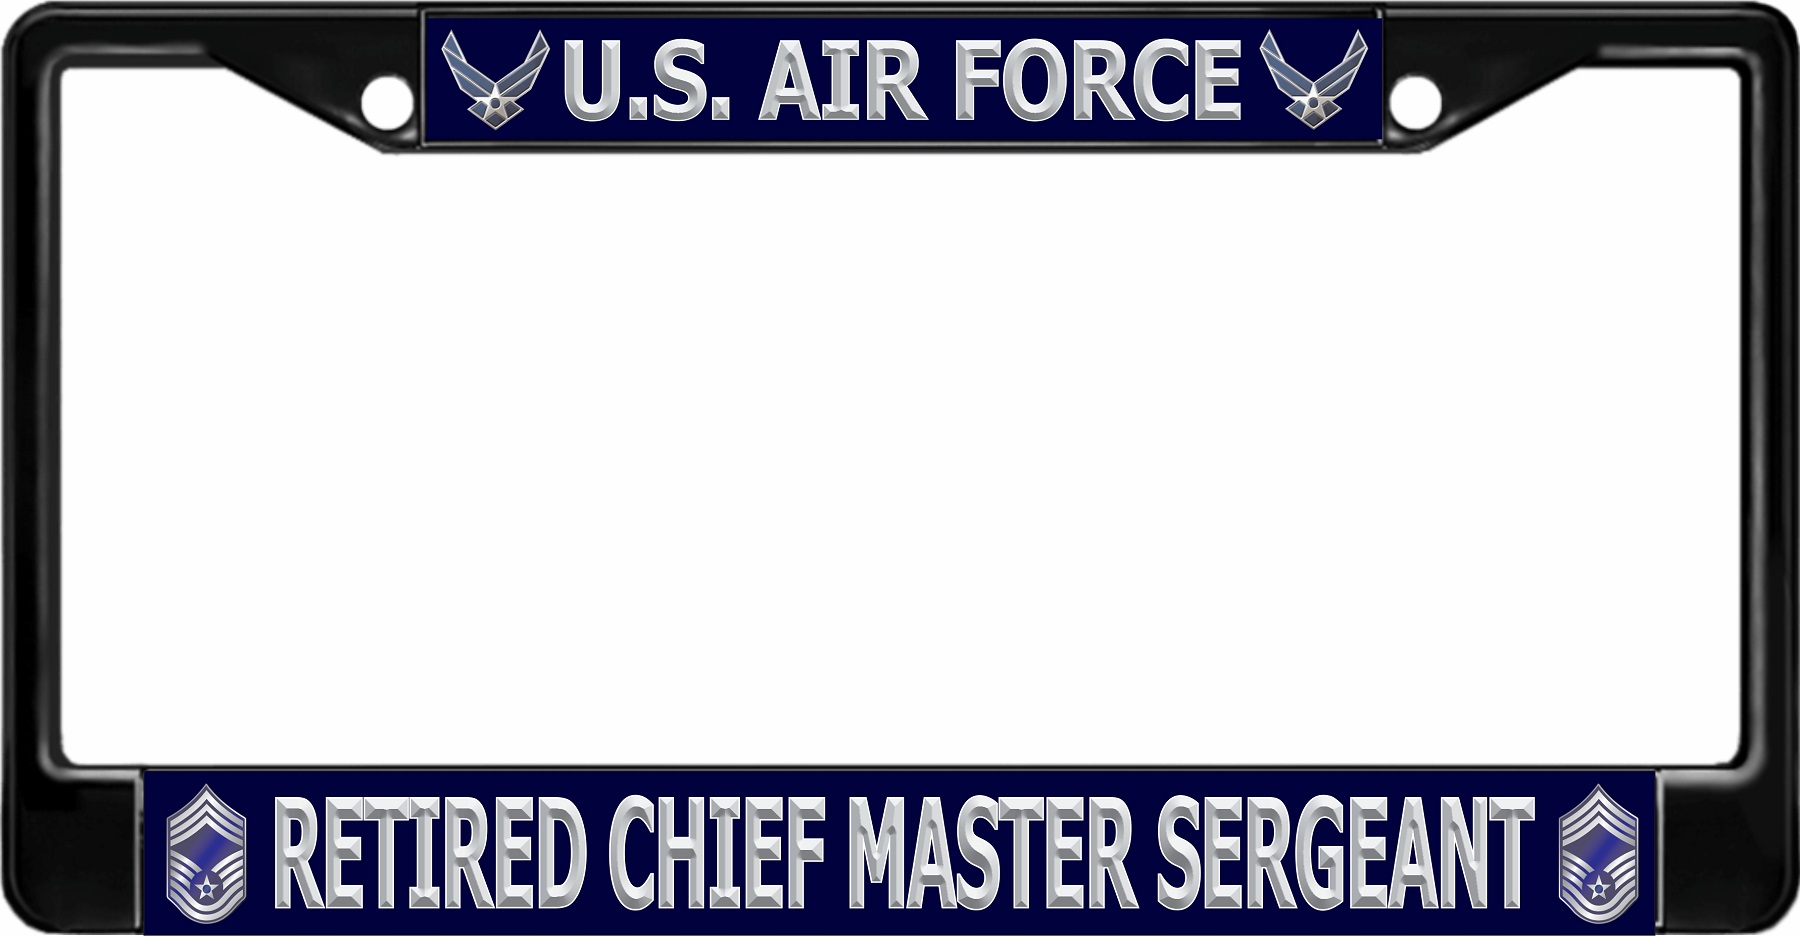 U.S. Air Force Retired Chief Master Sergeant Black LICENSE PLATE Frame